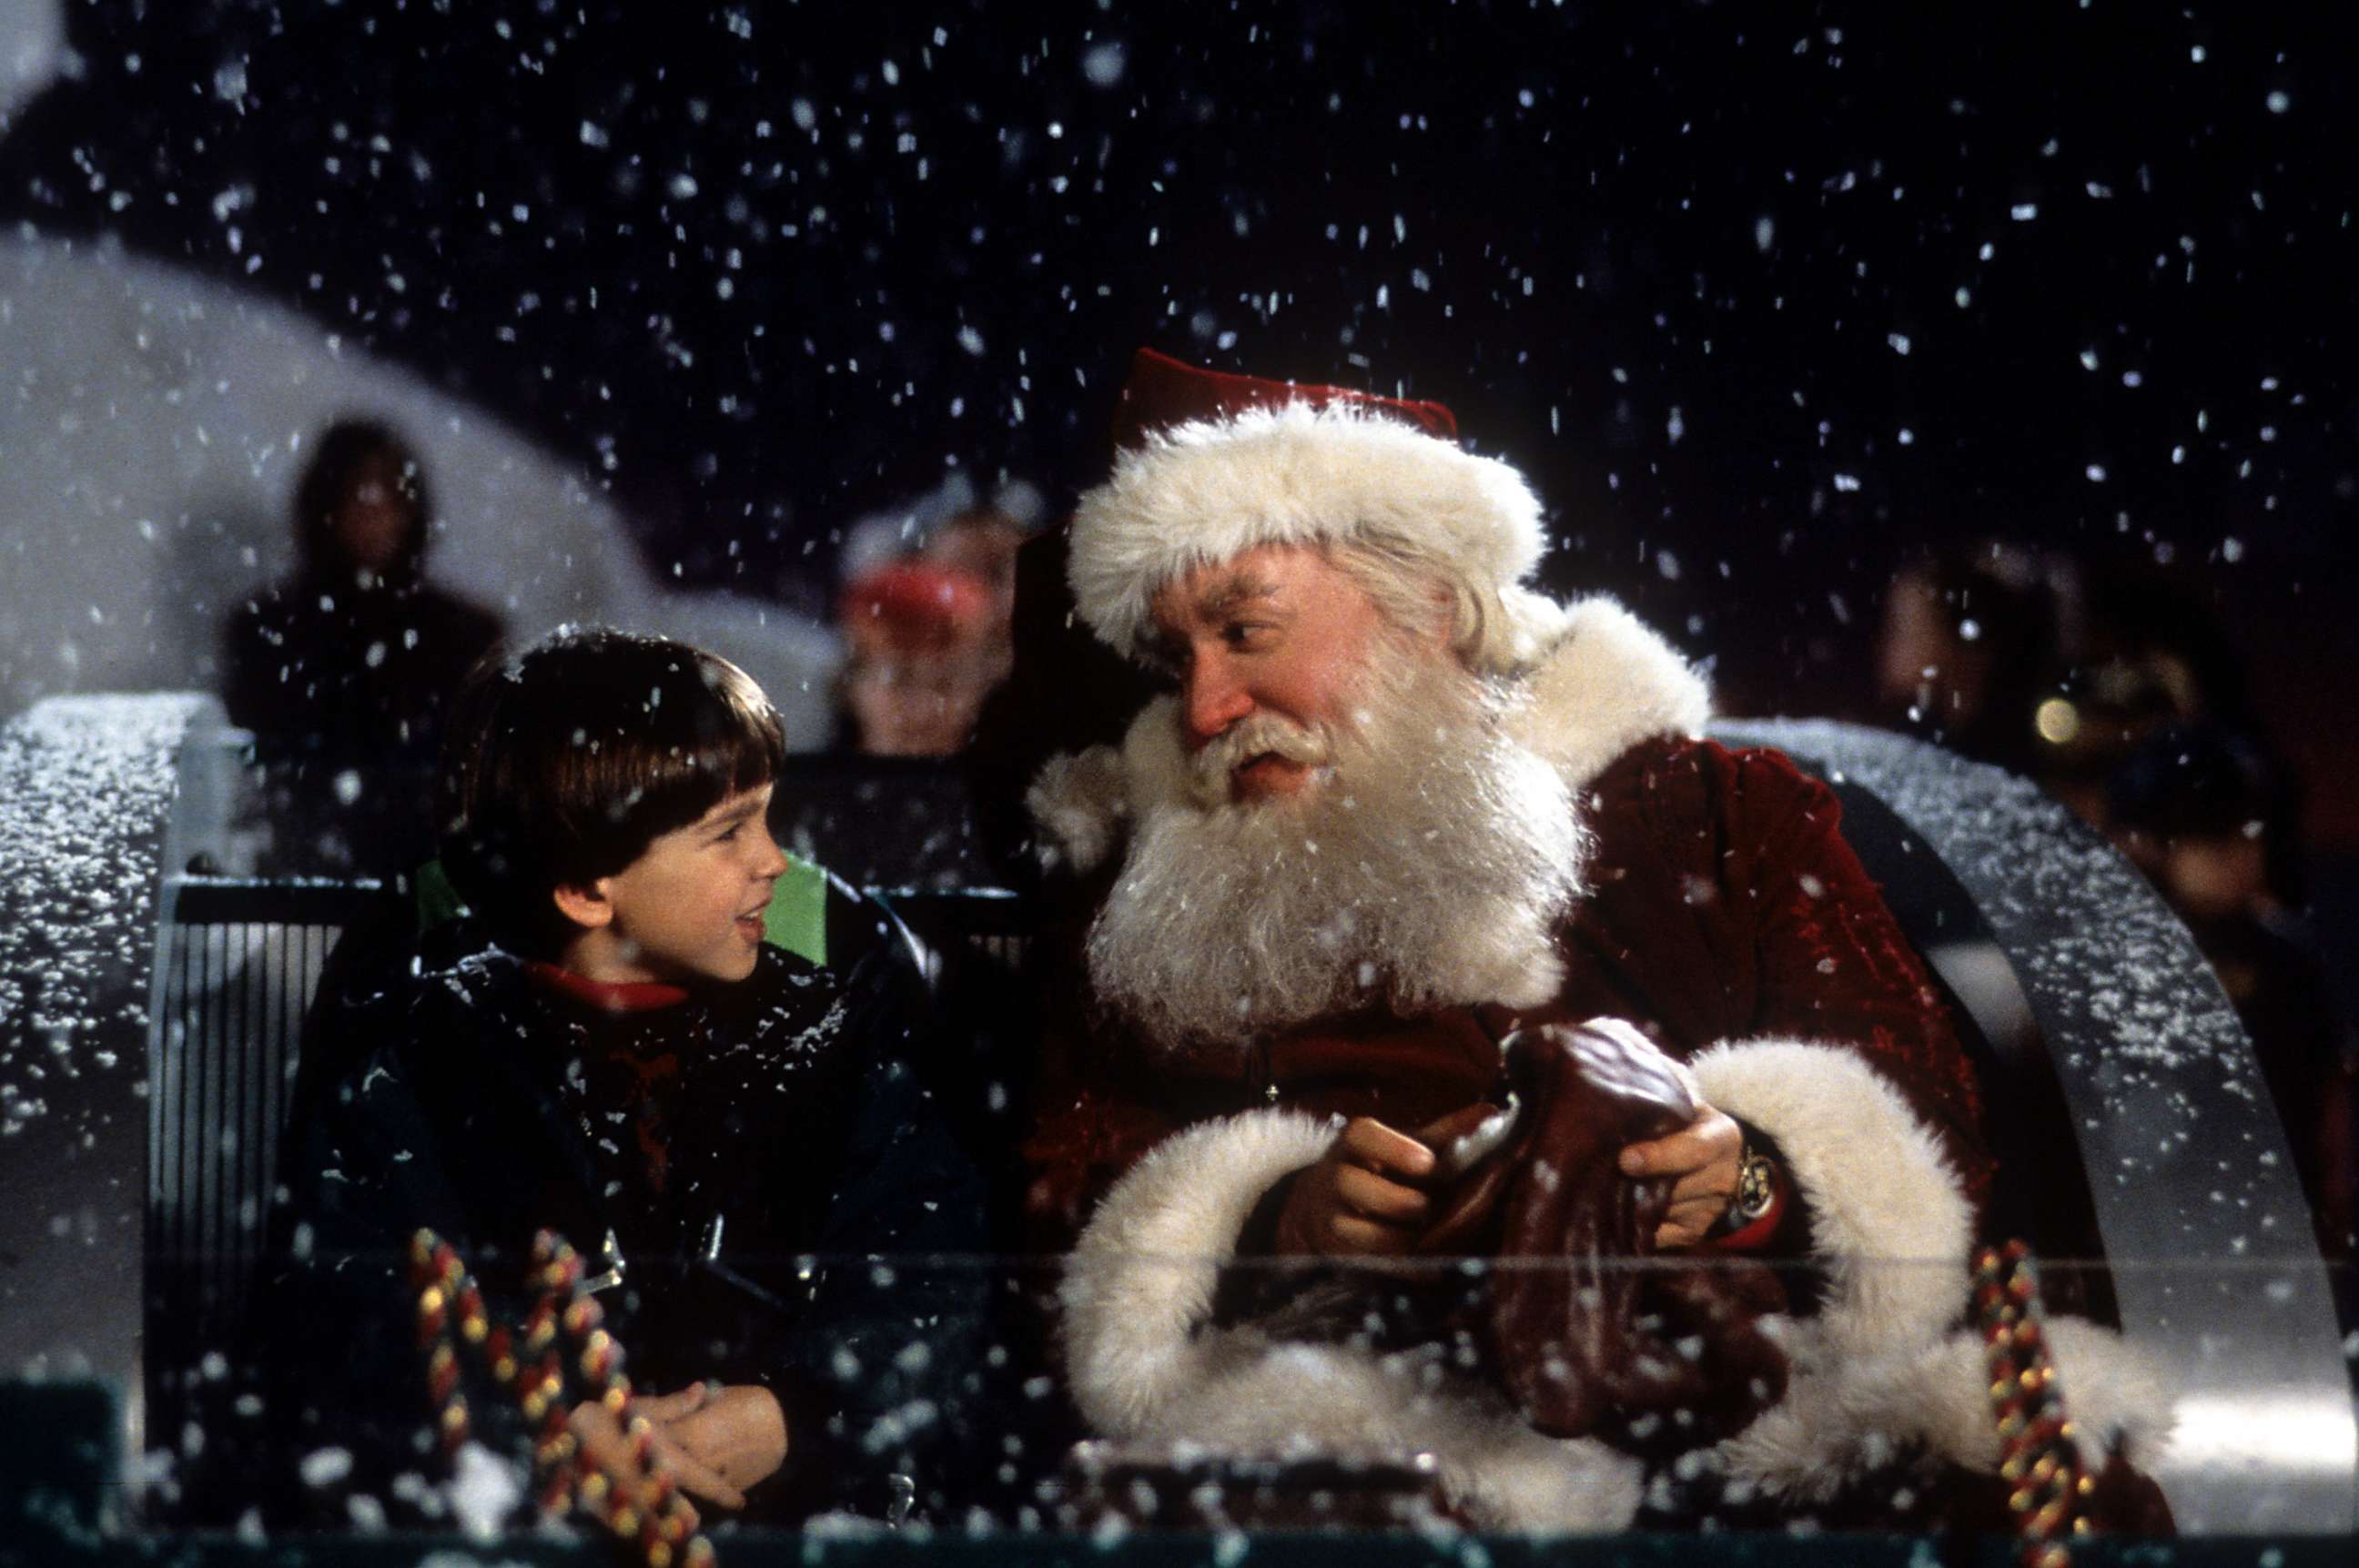 PHOTO: Tim Allen on a sled talking with Eric Lloyd in a scene from the film 'The Santa Clause', 1994. 